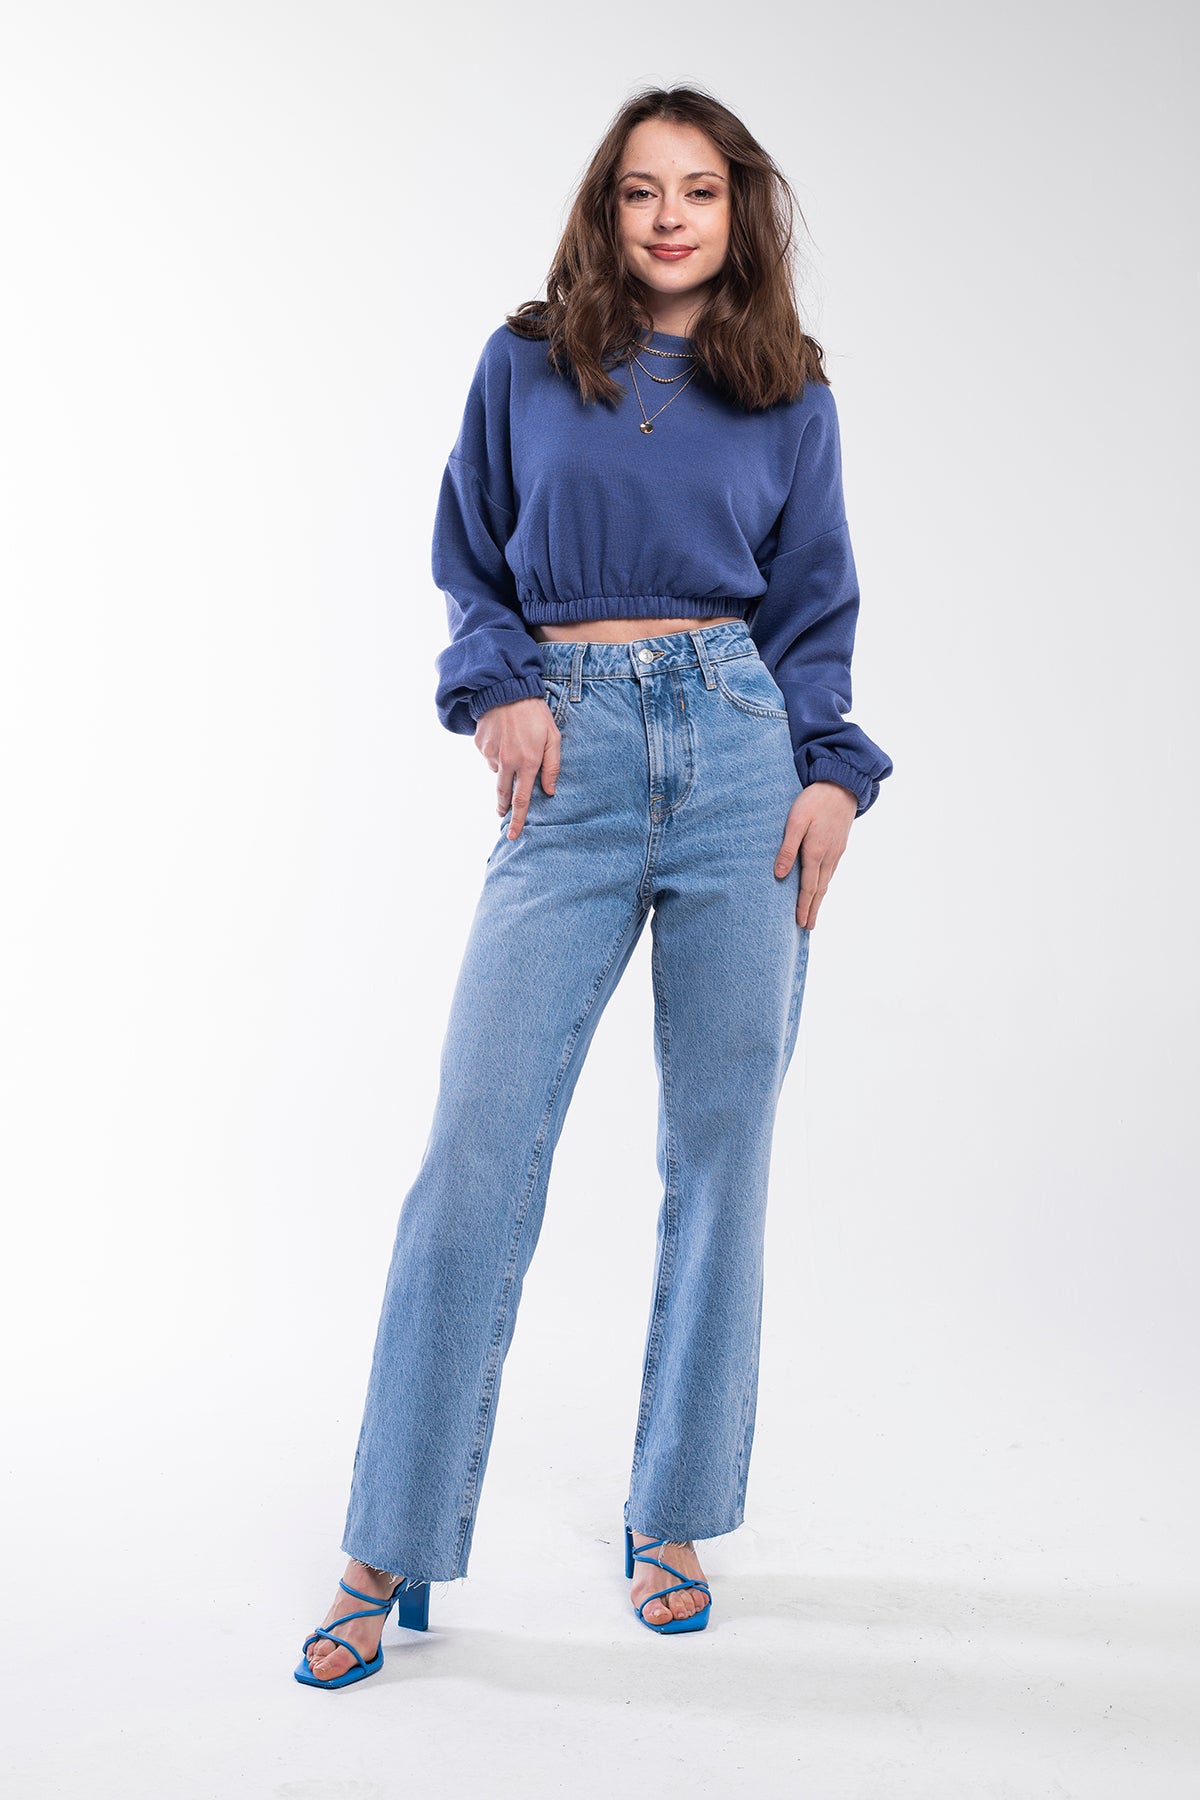 Blue bell fresh crop top sweatshirt with a round neck and an elastic waistband.